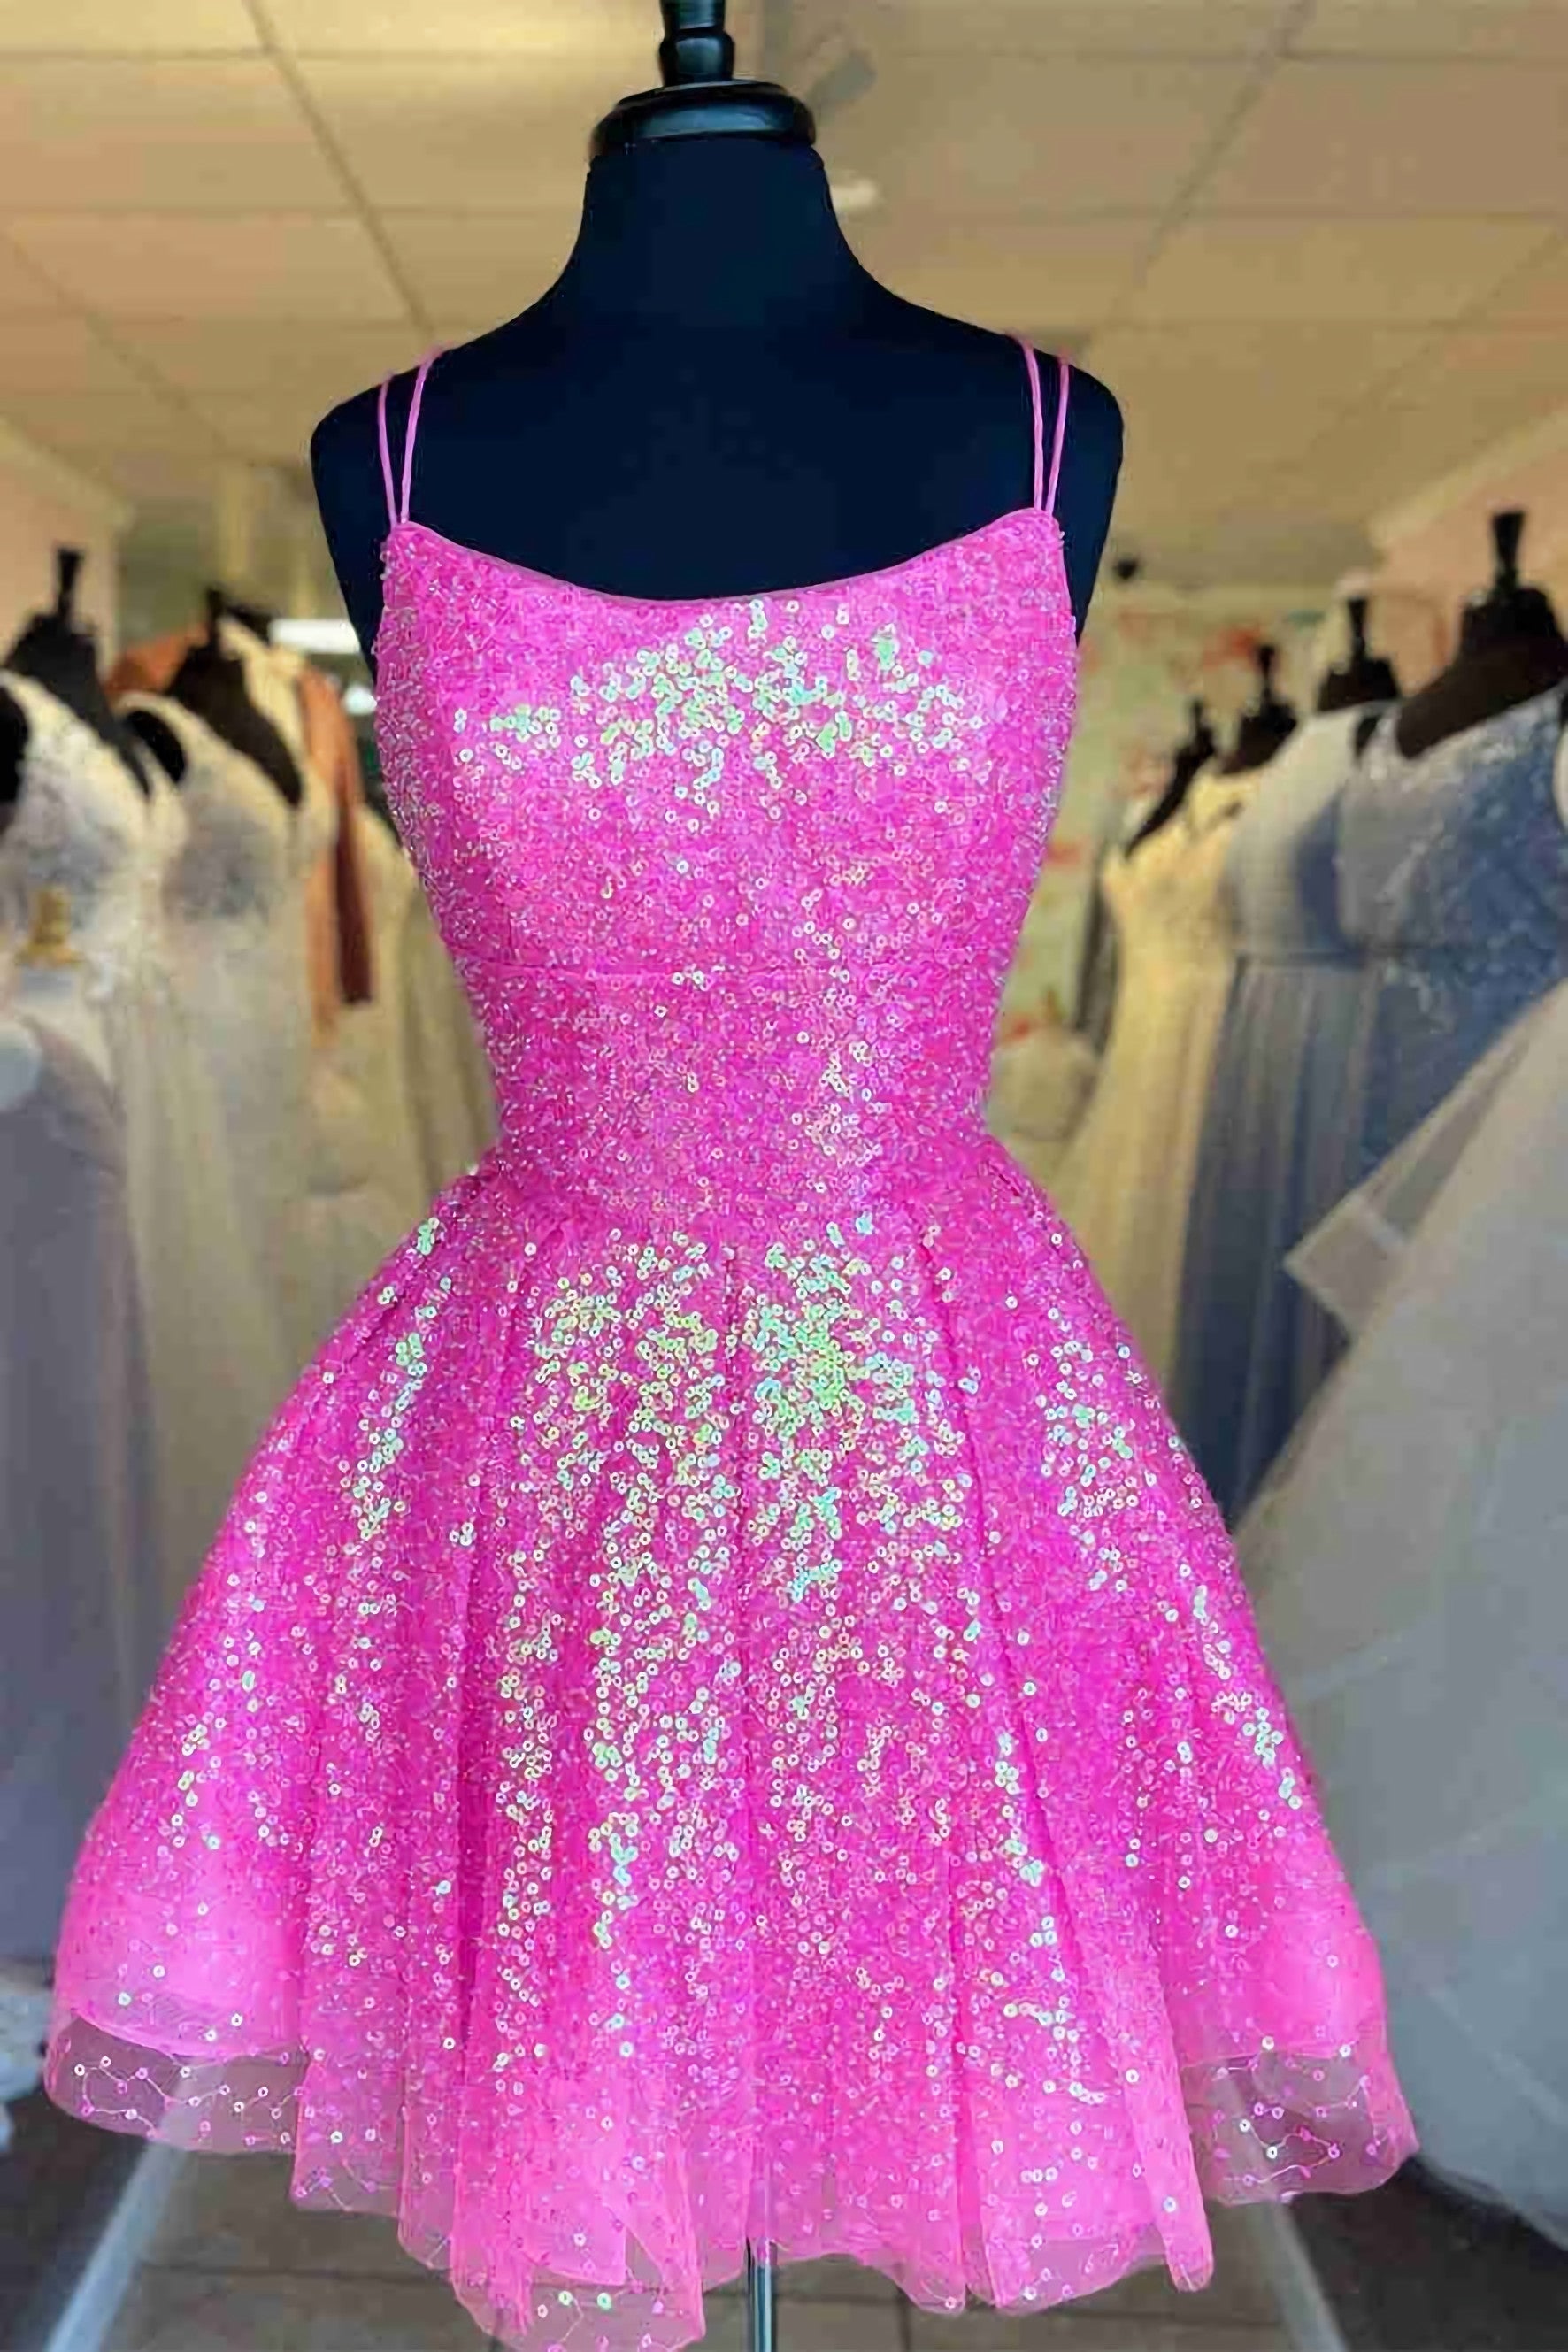 Cute Hot Pink Sequins A-Line Corset Homecoming Dress Hoco Night Dresses outfit, Party Dresses Europe